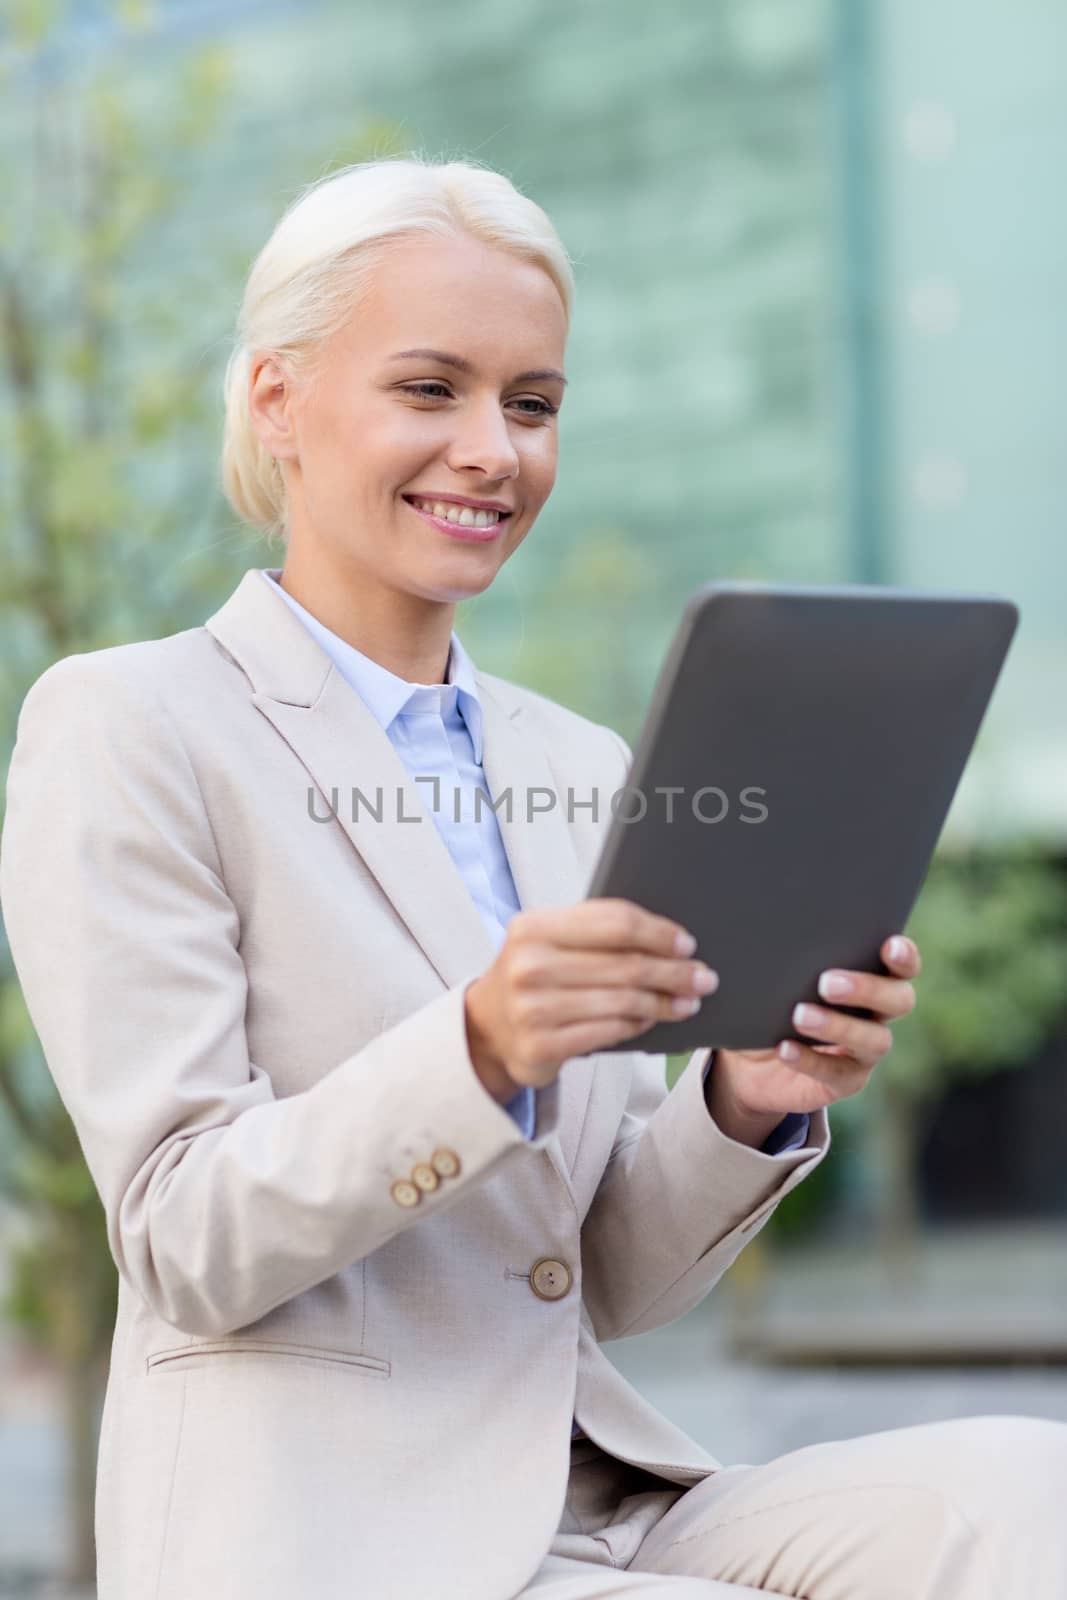 smiling businesswoman with tablet pc outdoors by dolgachov